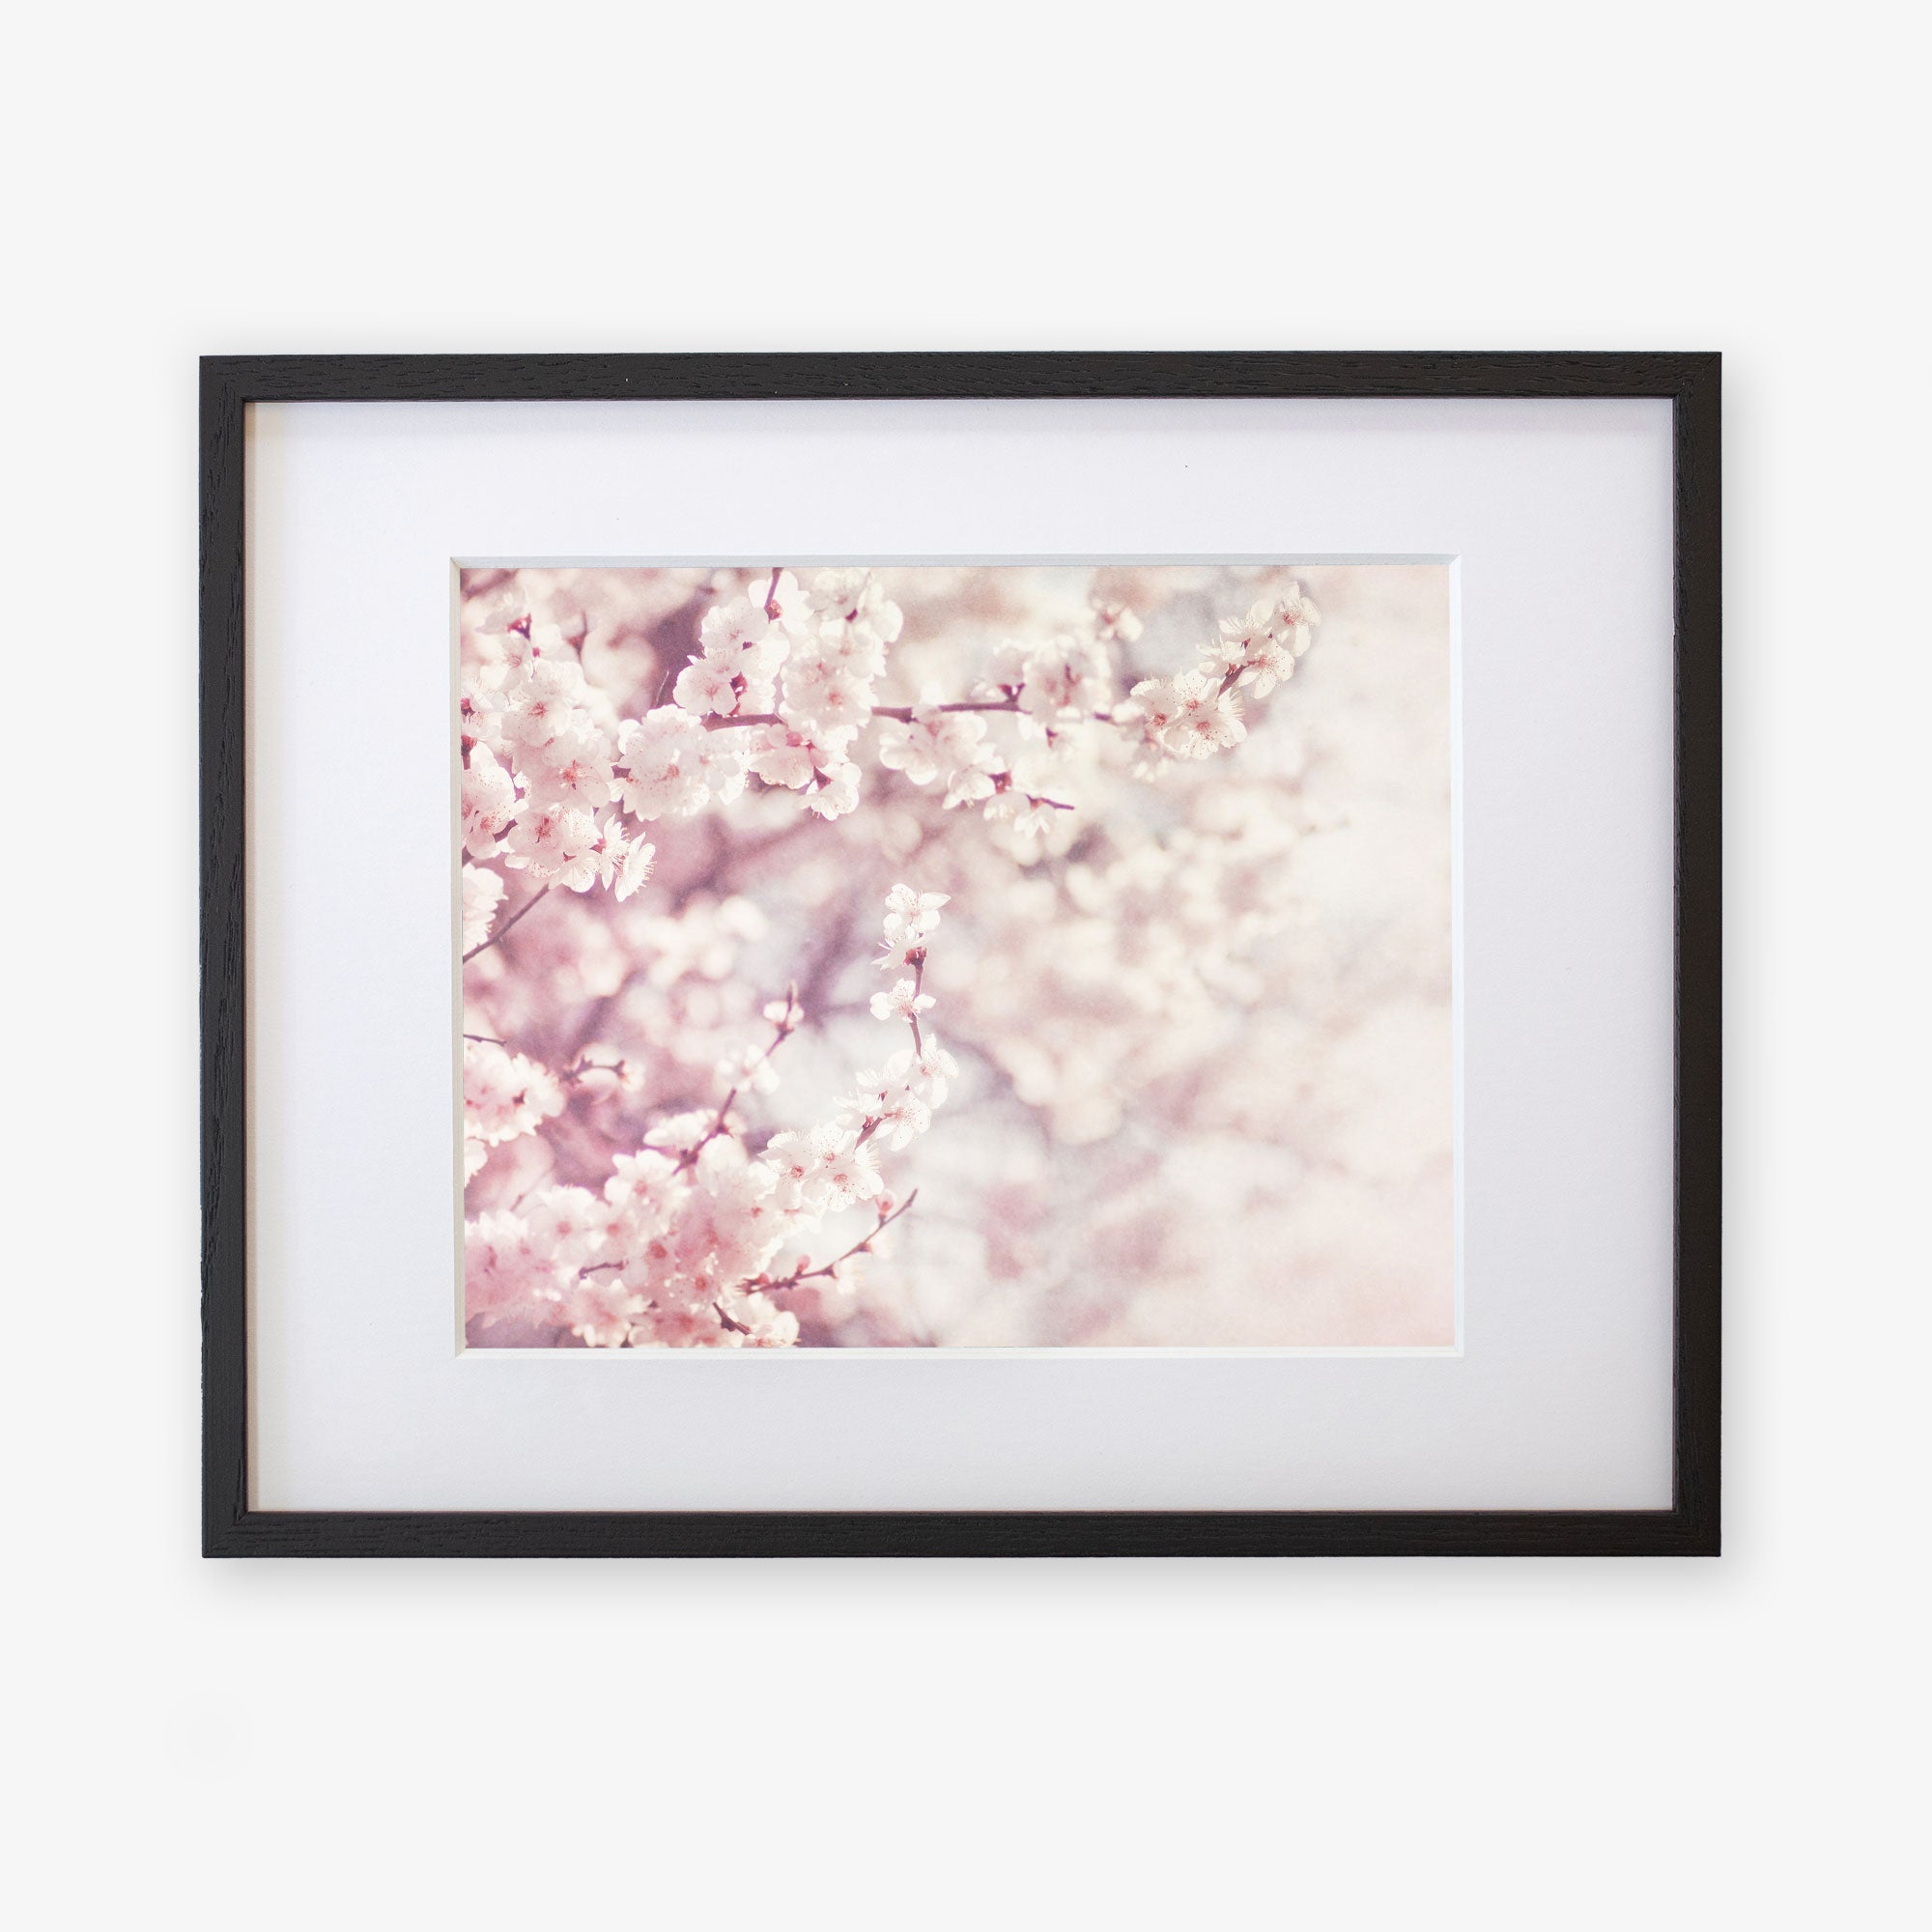 A framed photograph depicting a close-up view of delicate pink cherry blossoms against a softly blurred background, highlighting the floral elegance and pastel hues, Pink Floral Print &#39;Dreamy Blossom&#39; by Offley Green.